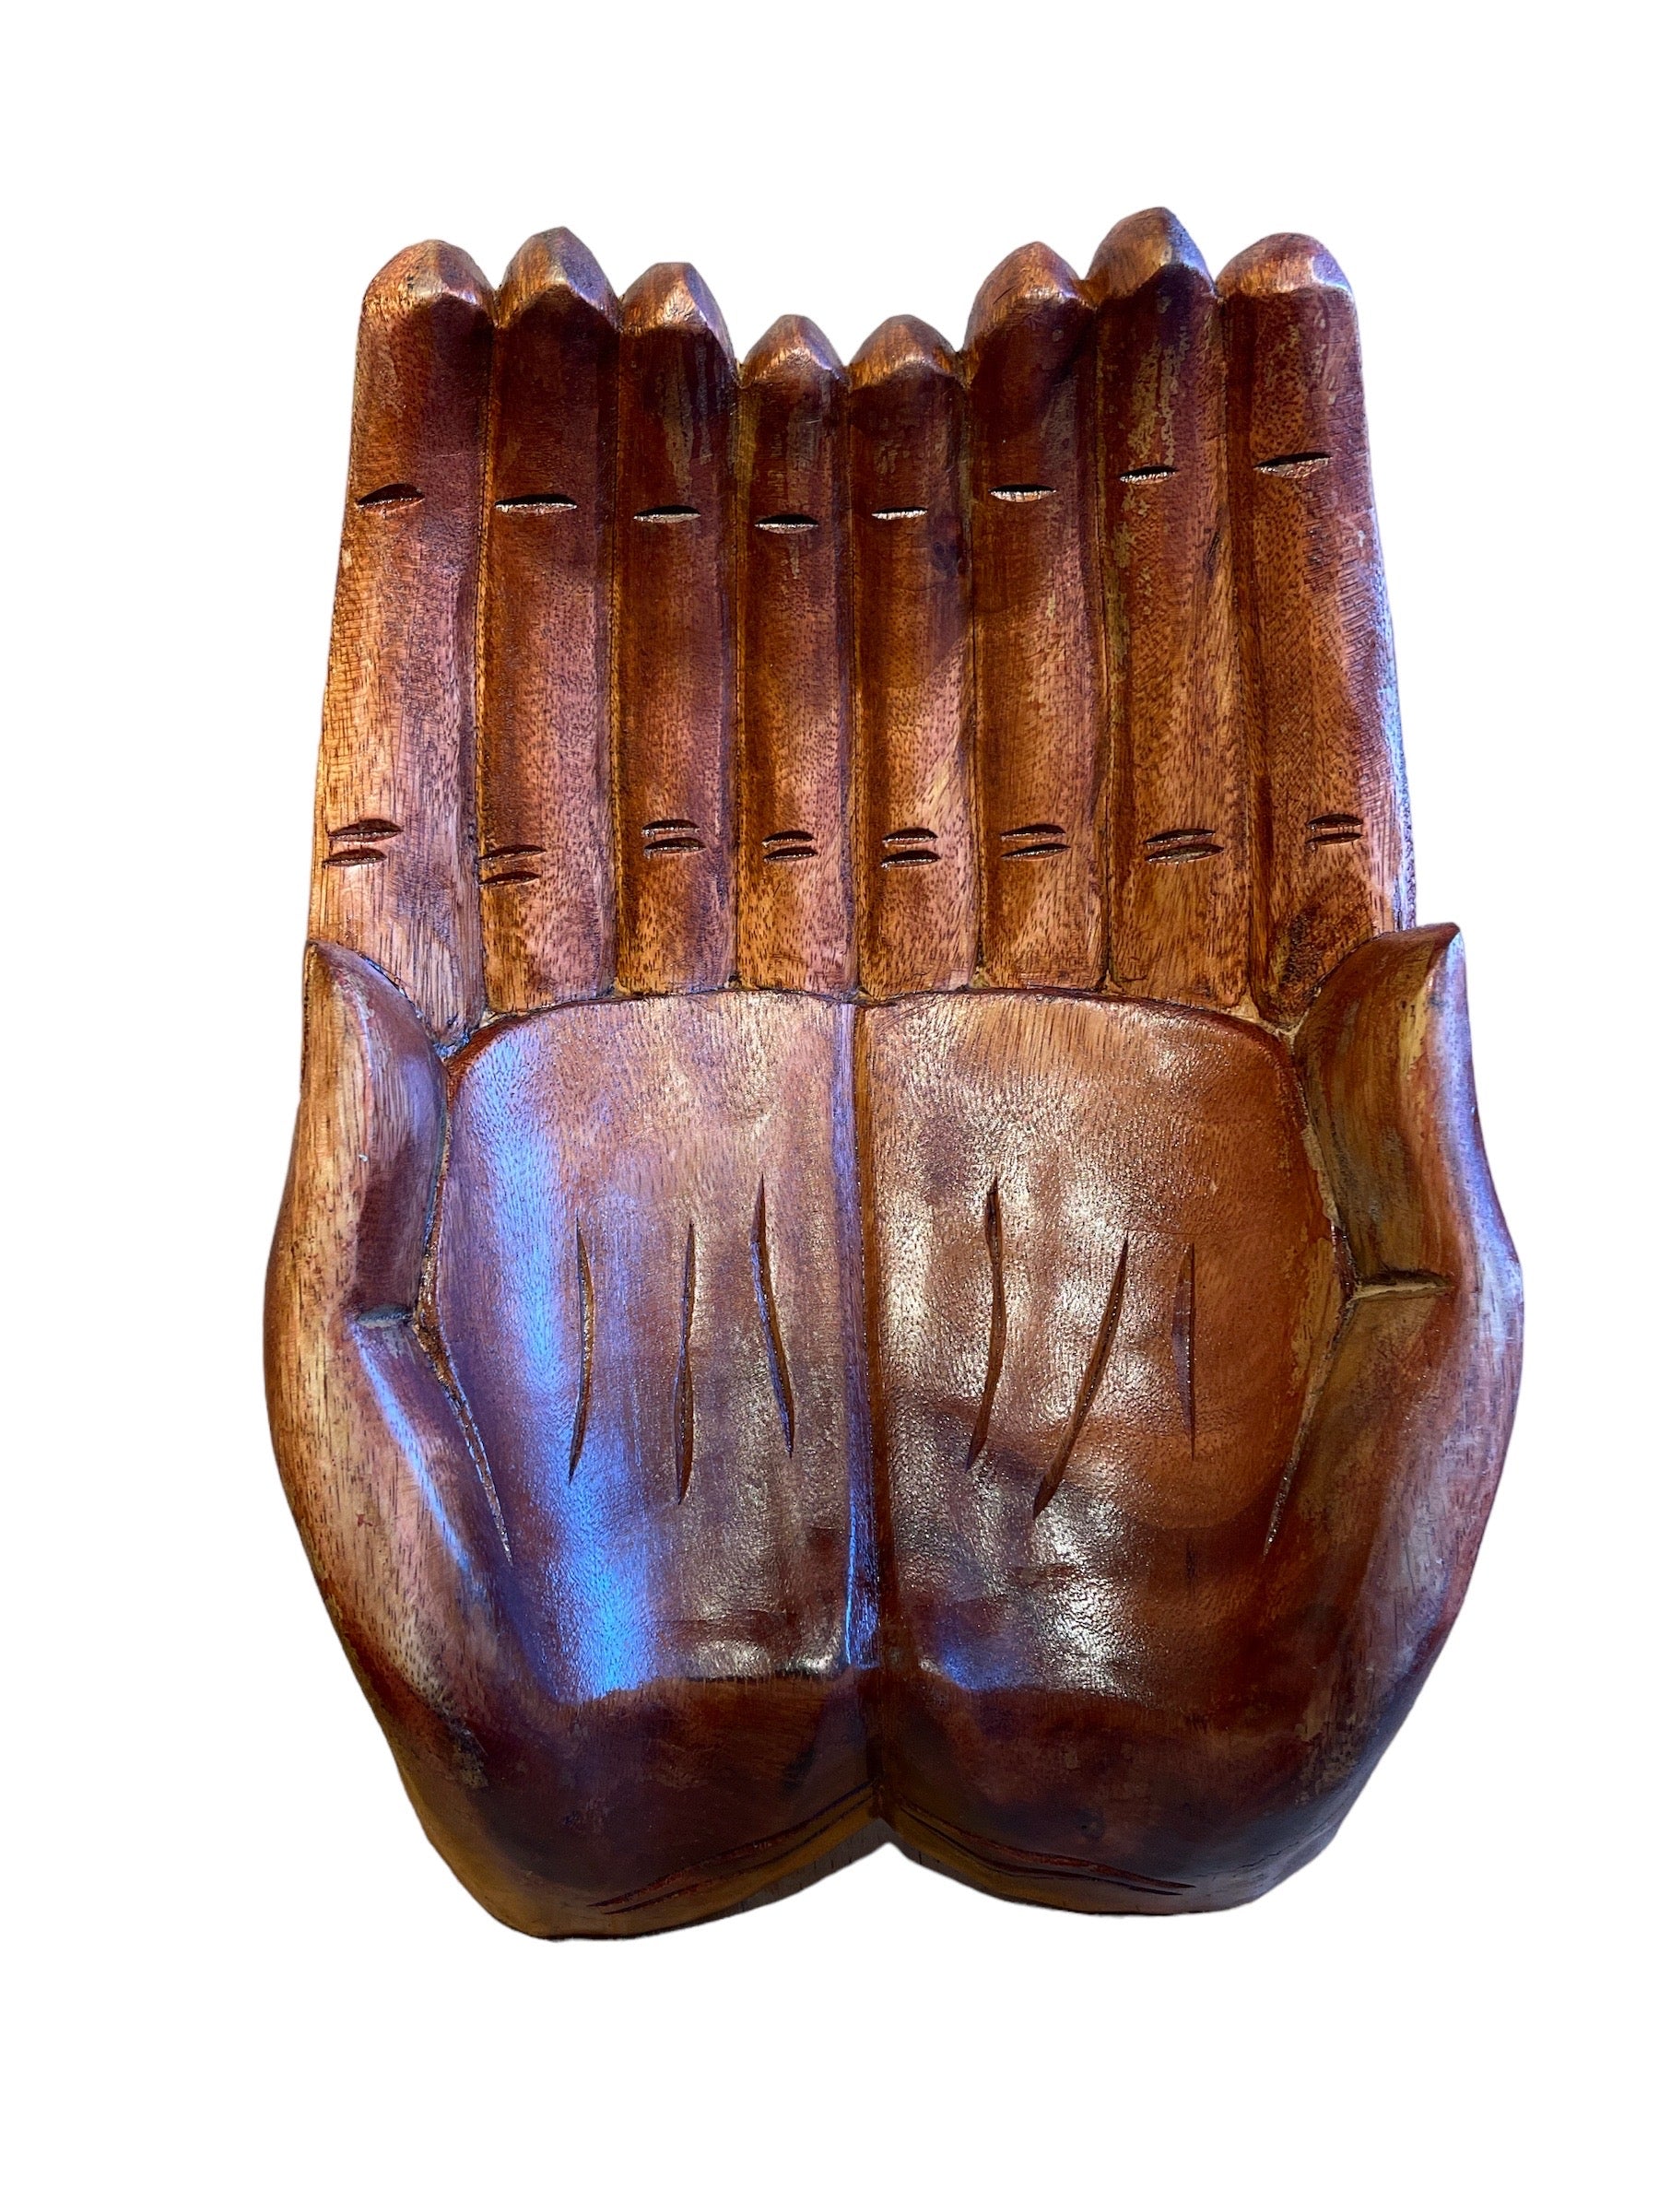 Carved Wooden Hands - XXL Two Hands